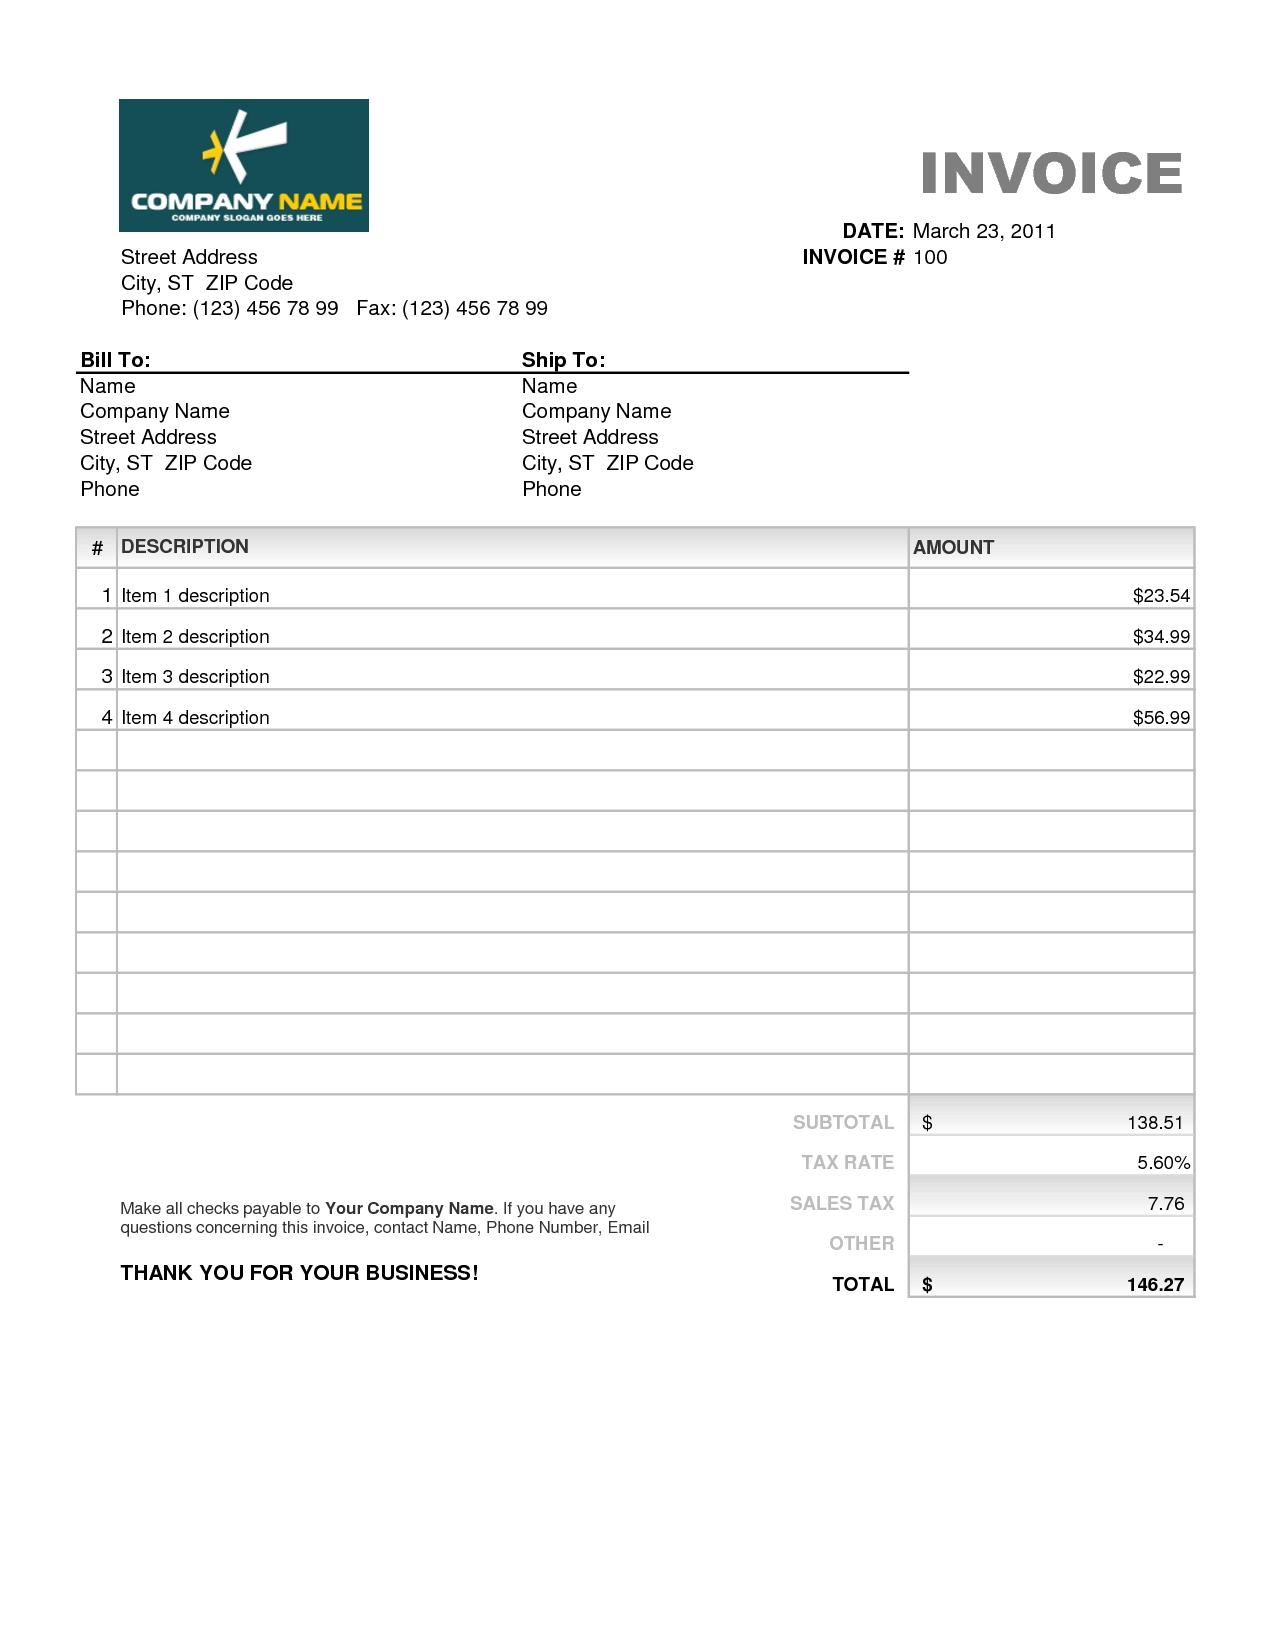 invoice excel download template invoice excel seven 1275 X 1650